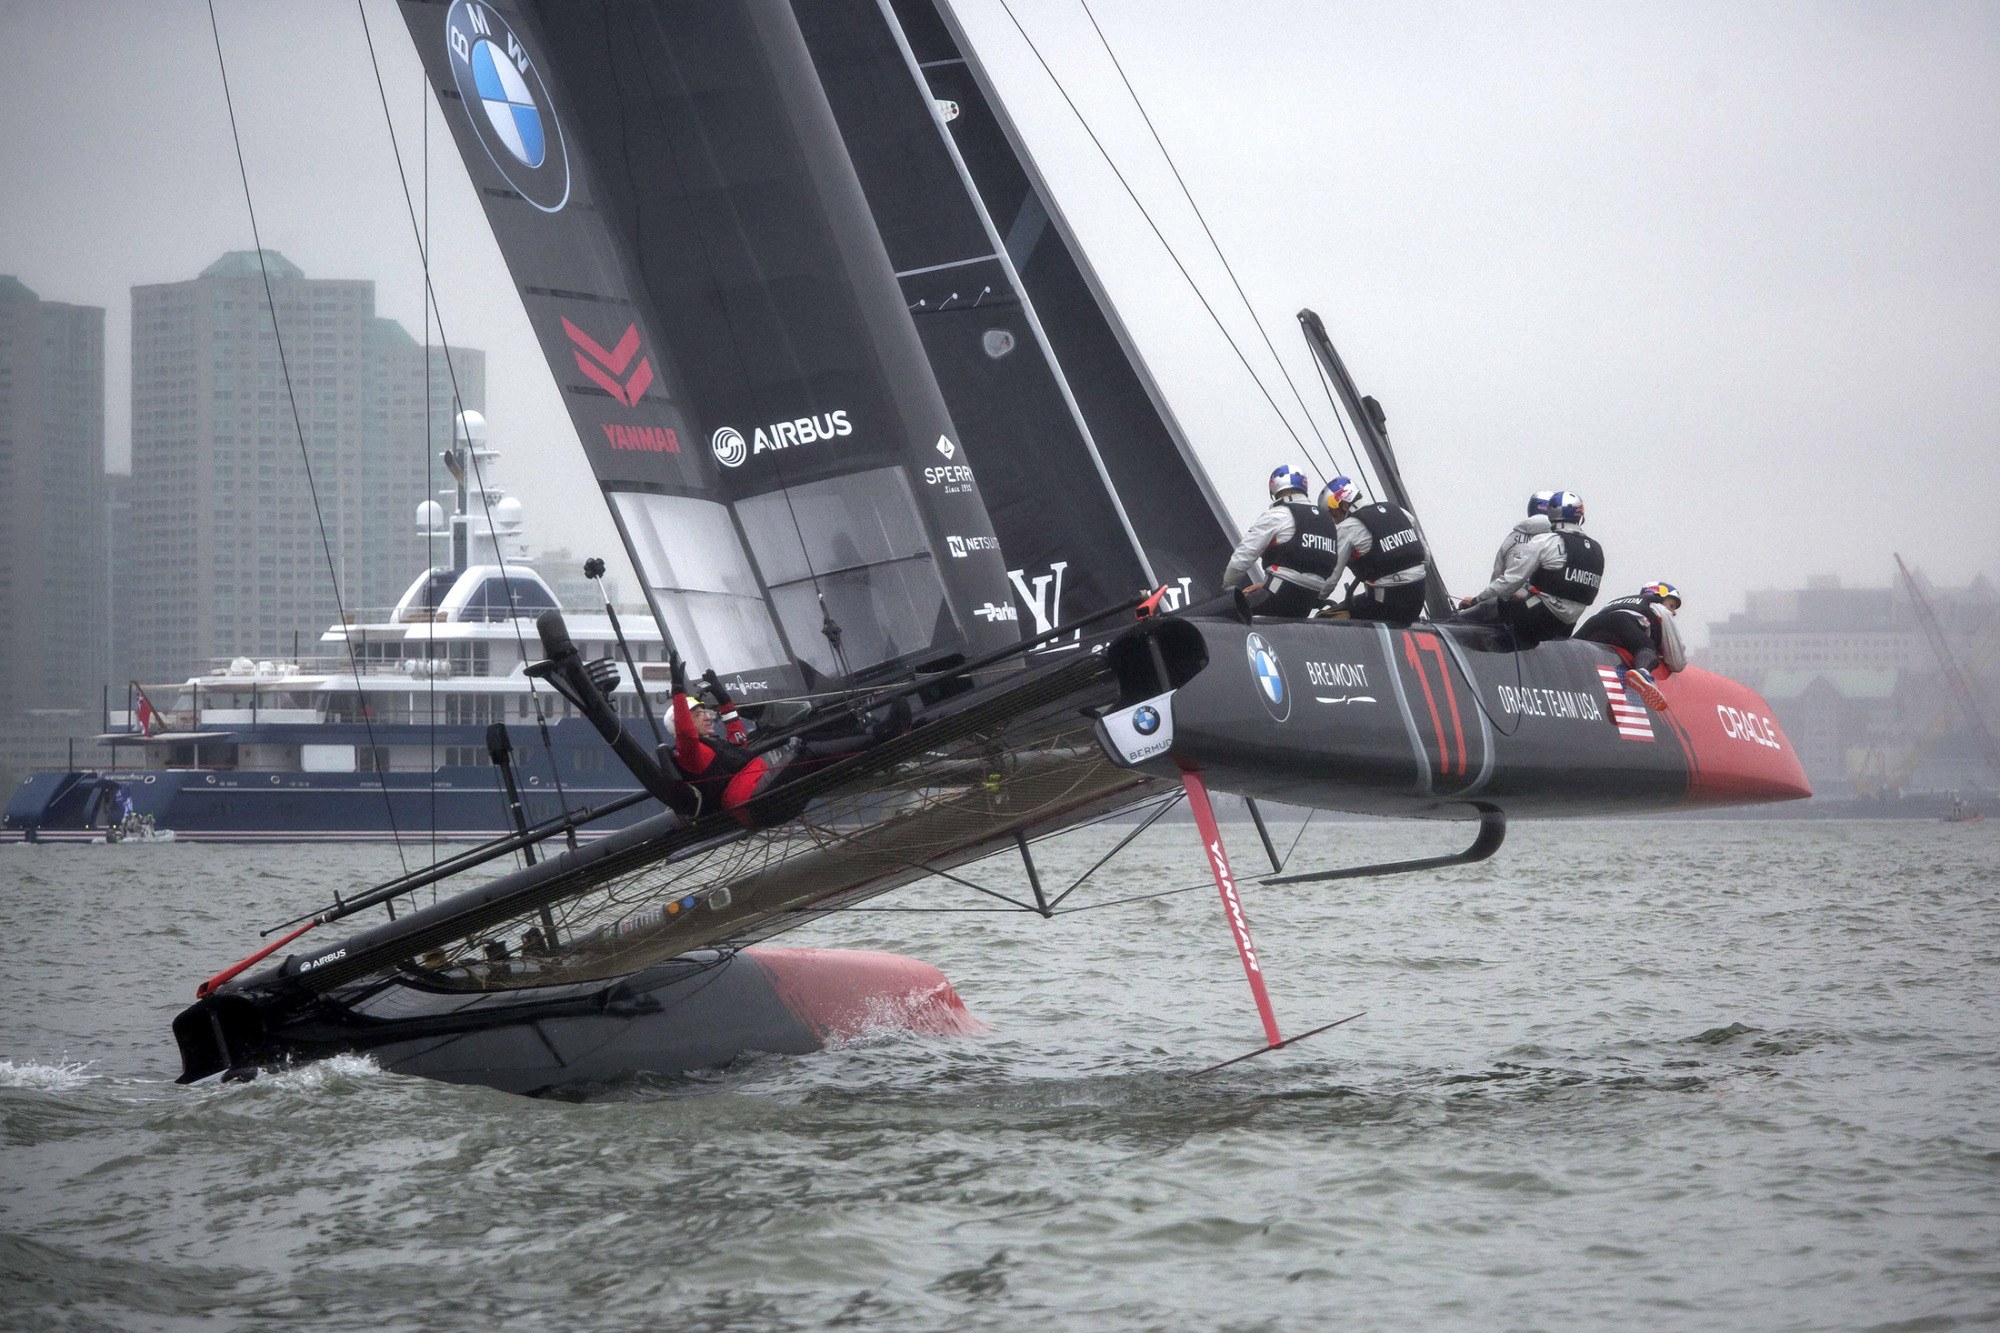 when did america cup change to catamarans